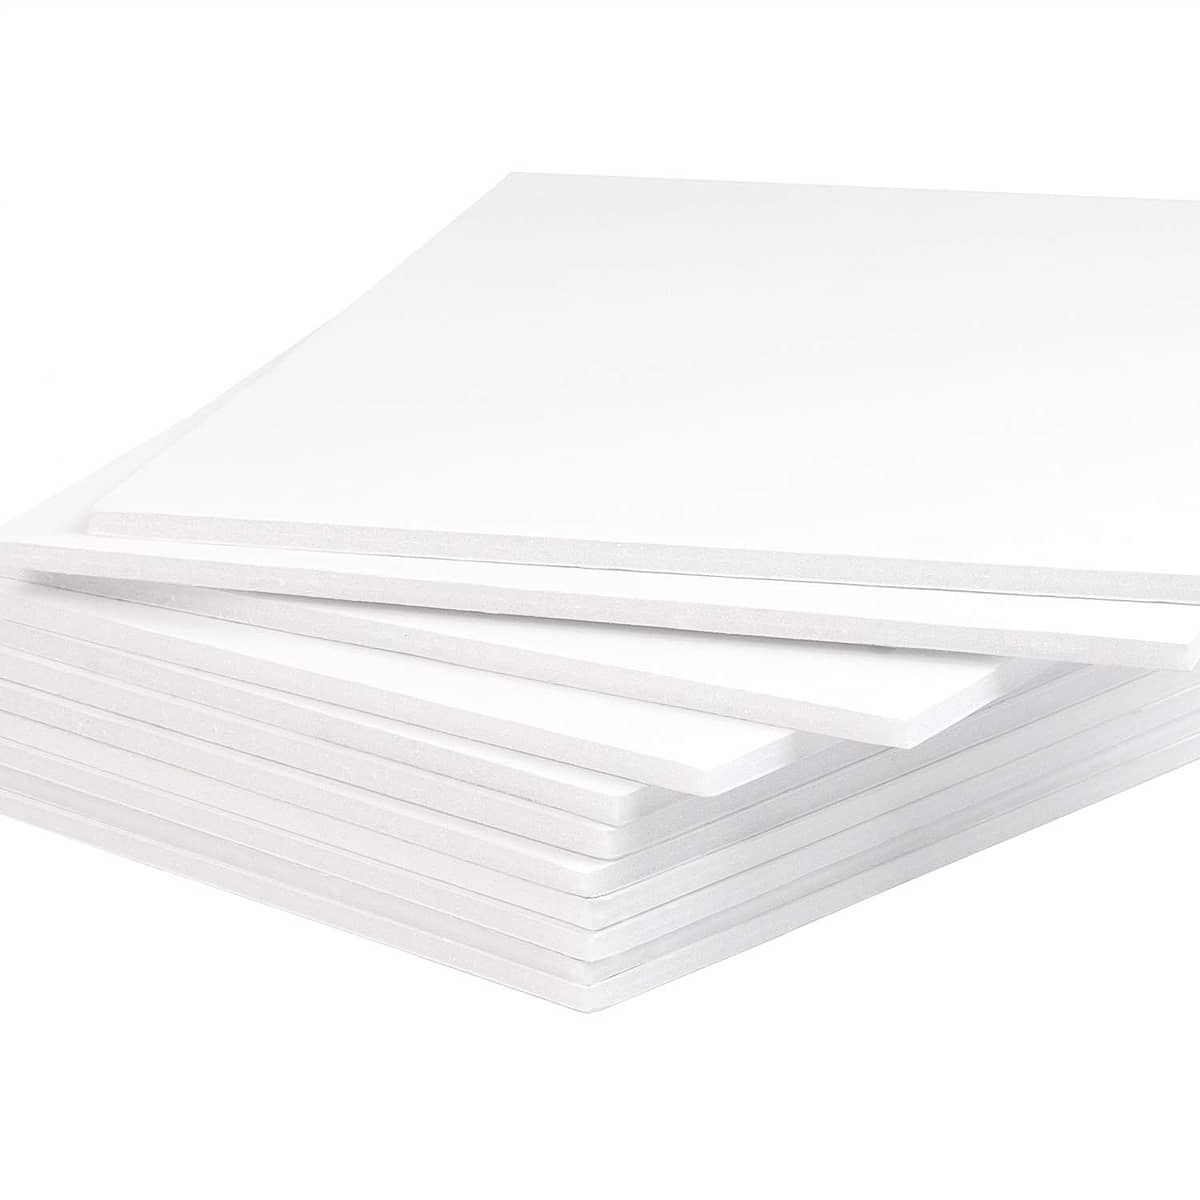 Viewpoint Acid-Free White Foam Backing 9x12", 1/8" Thick 5 Pack